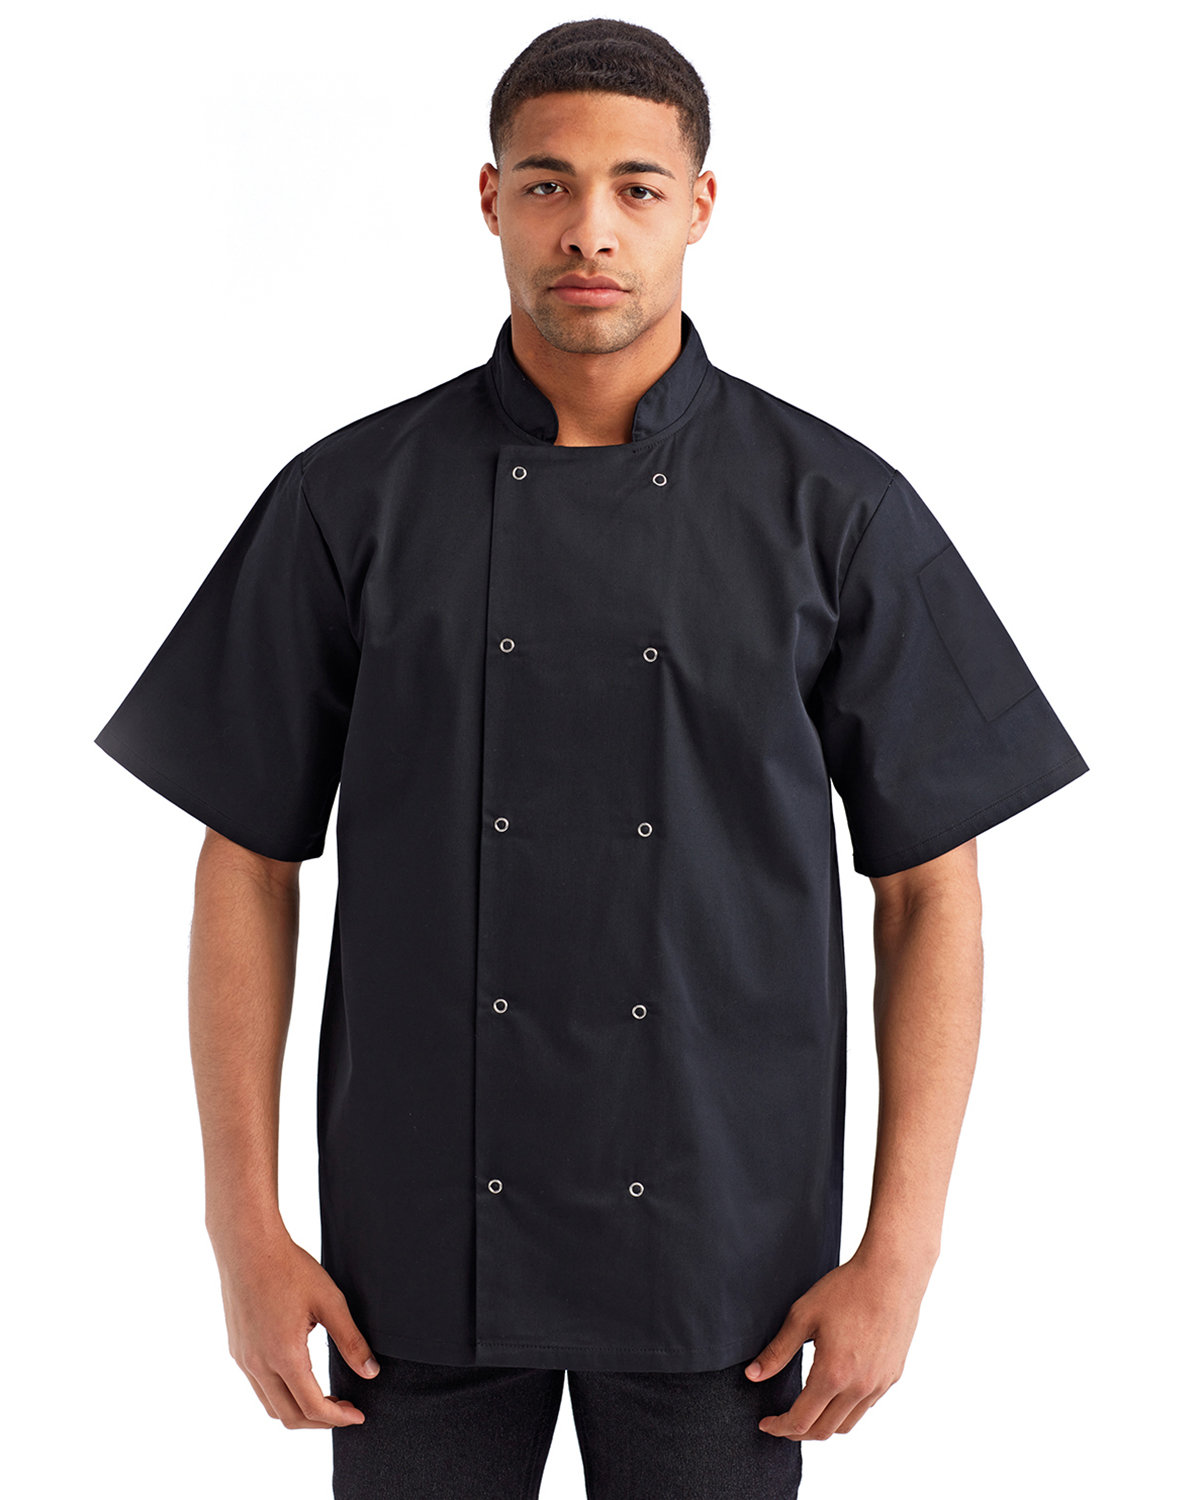 Artisan Collection by Reprime Unisex Studded Front Short-Sleeve Chef's Jacket BLACK 